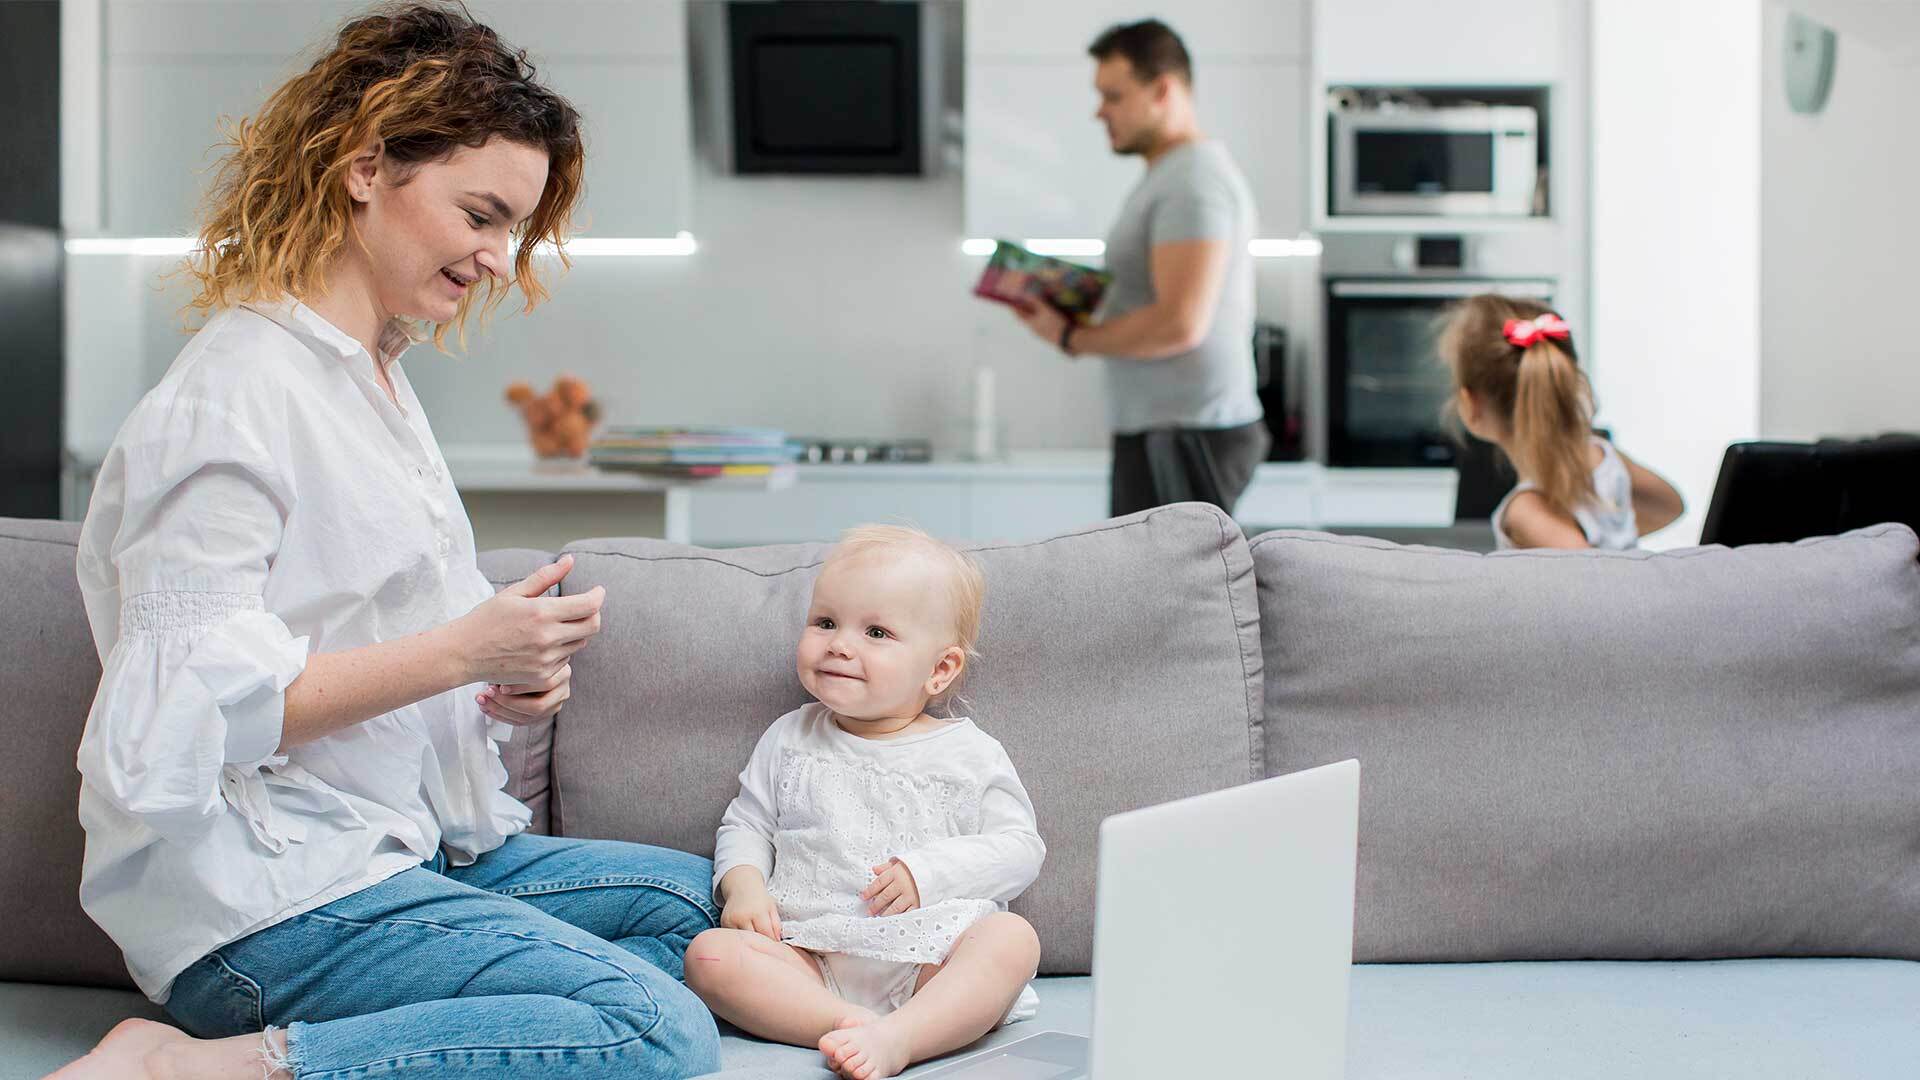 10 Tips for Parents Balancing Work From Home & Parenting